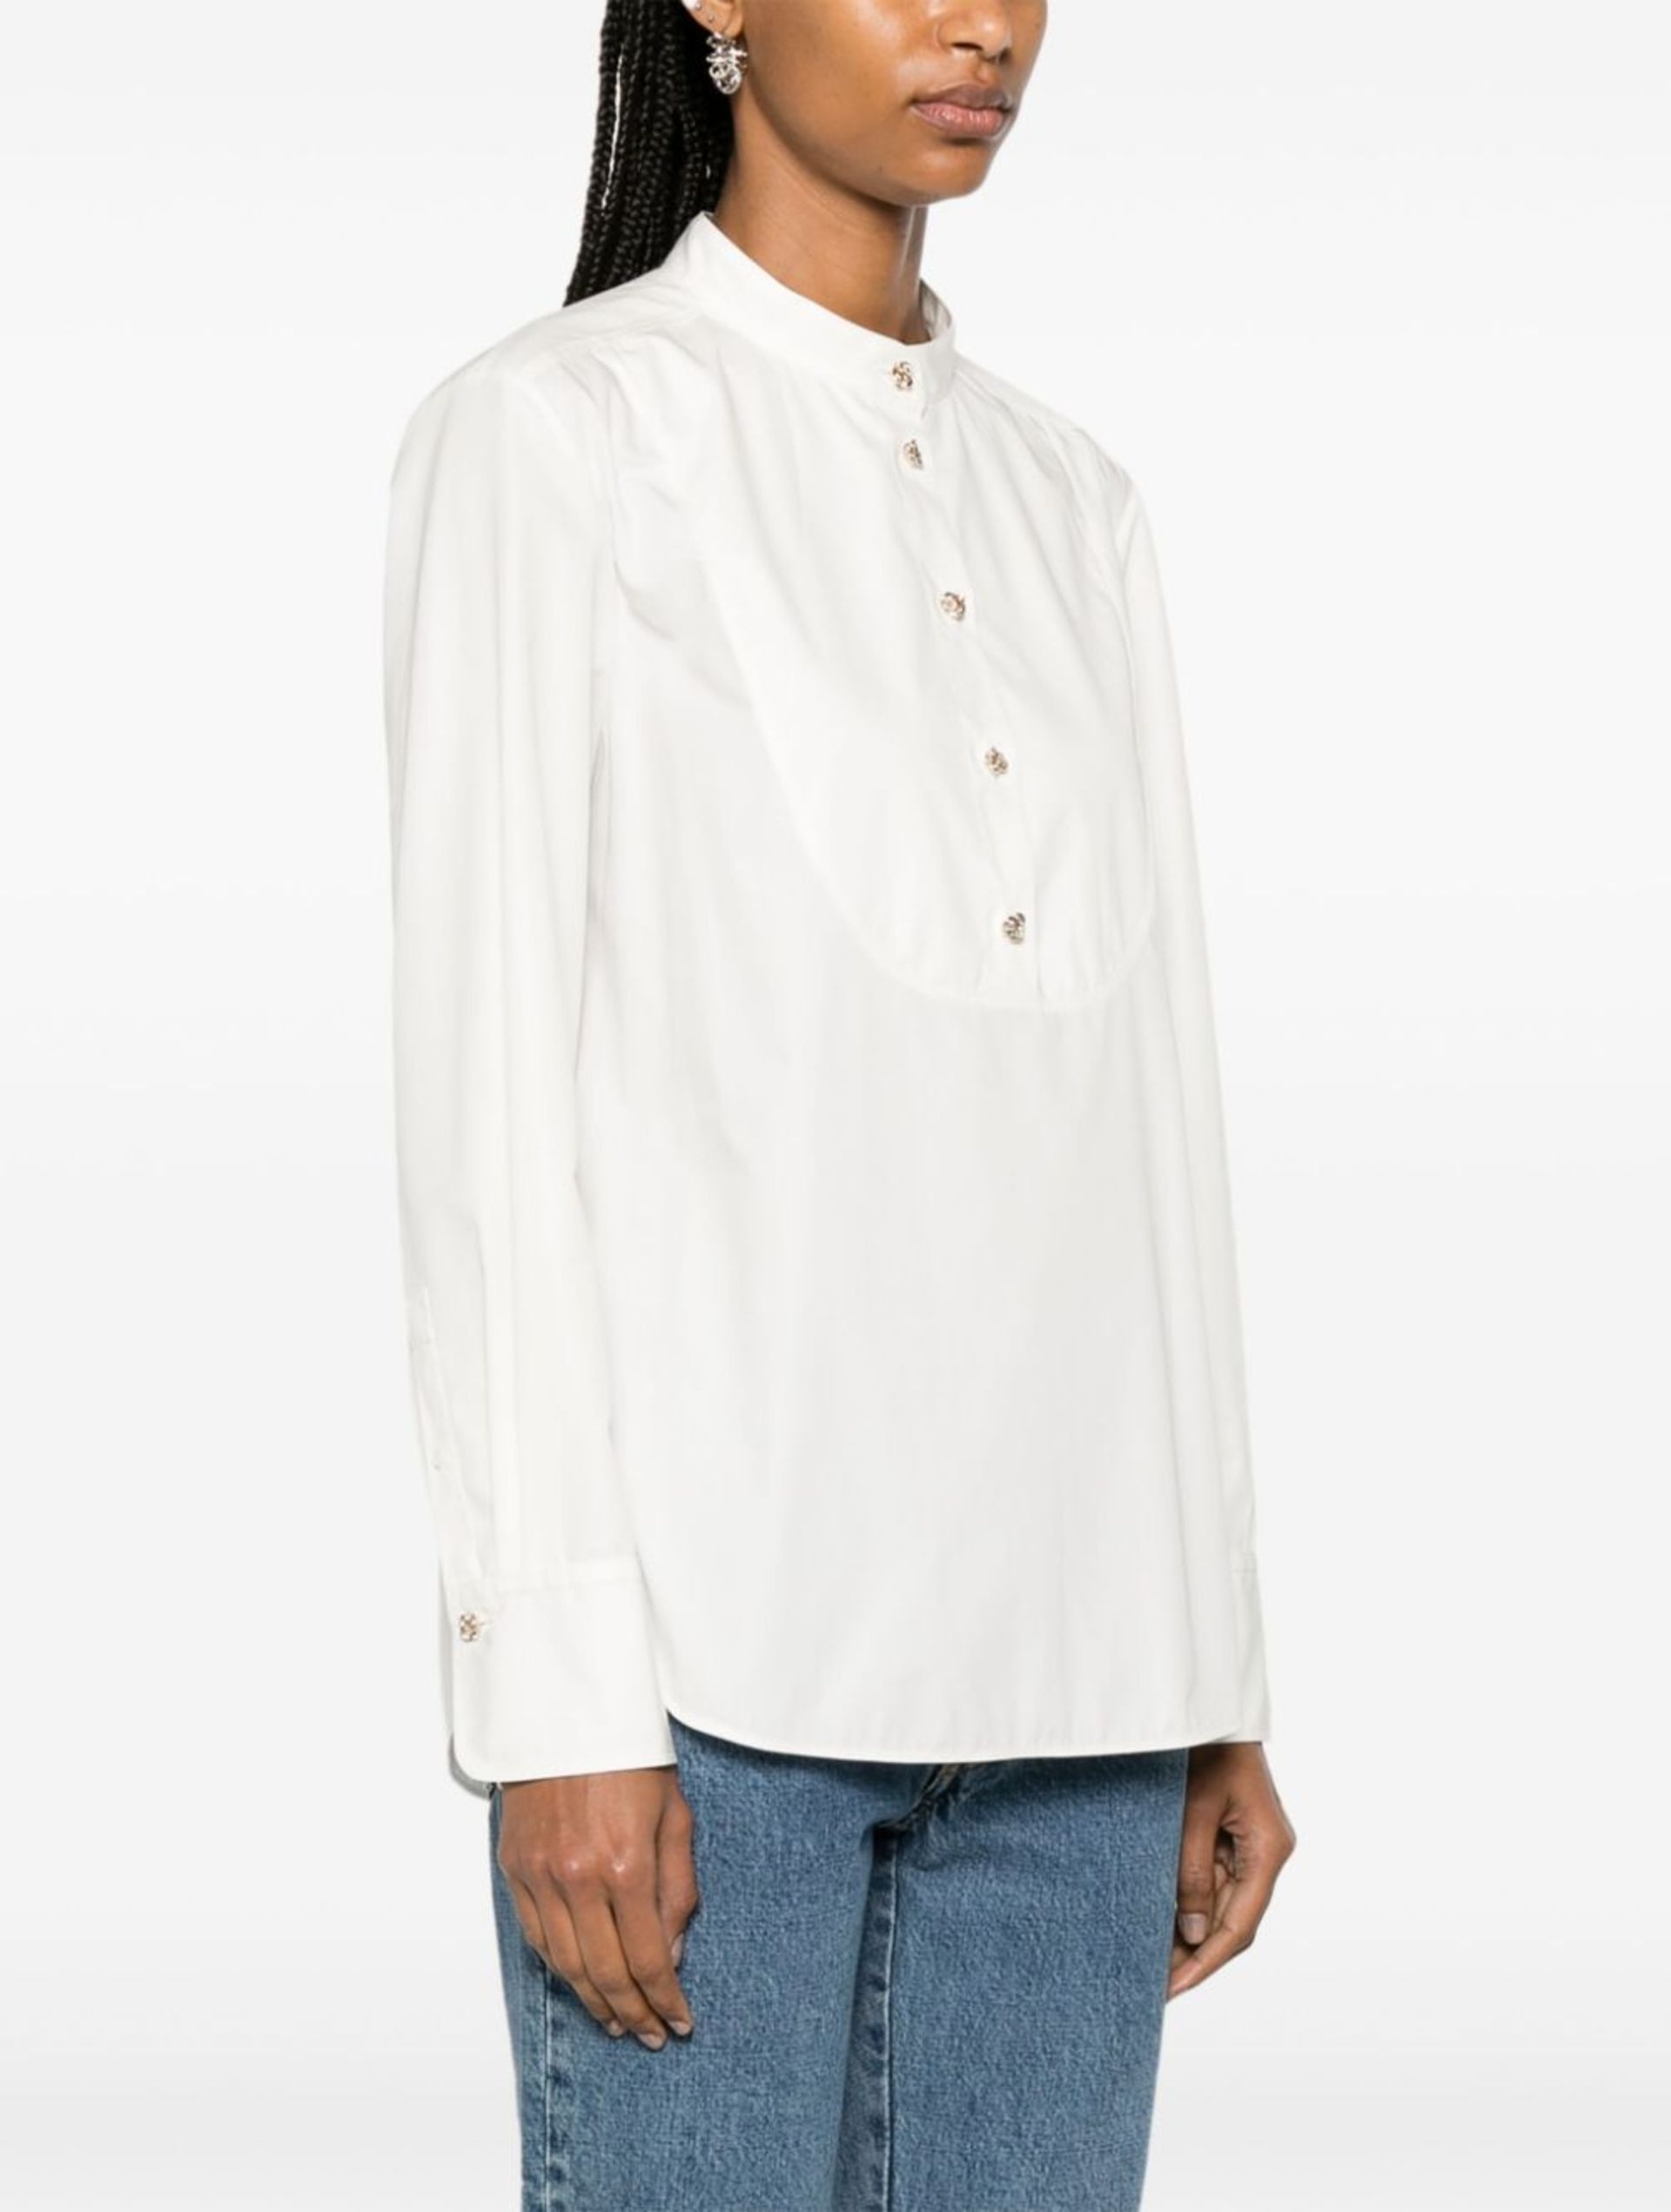 White Knotted-Buttons Poplin Shirt - 3